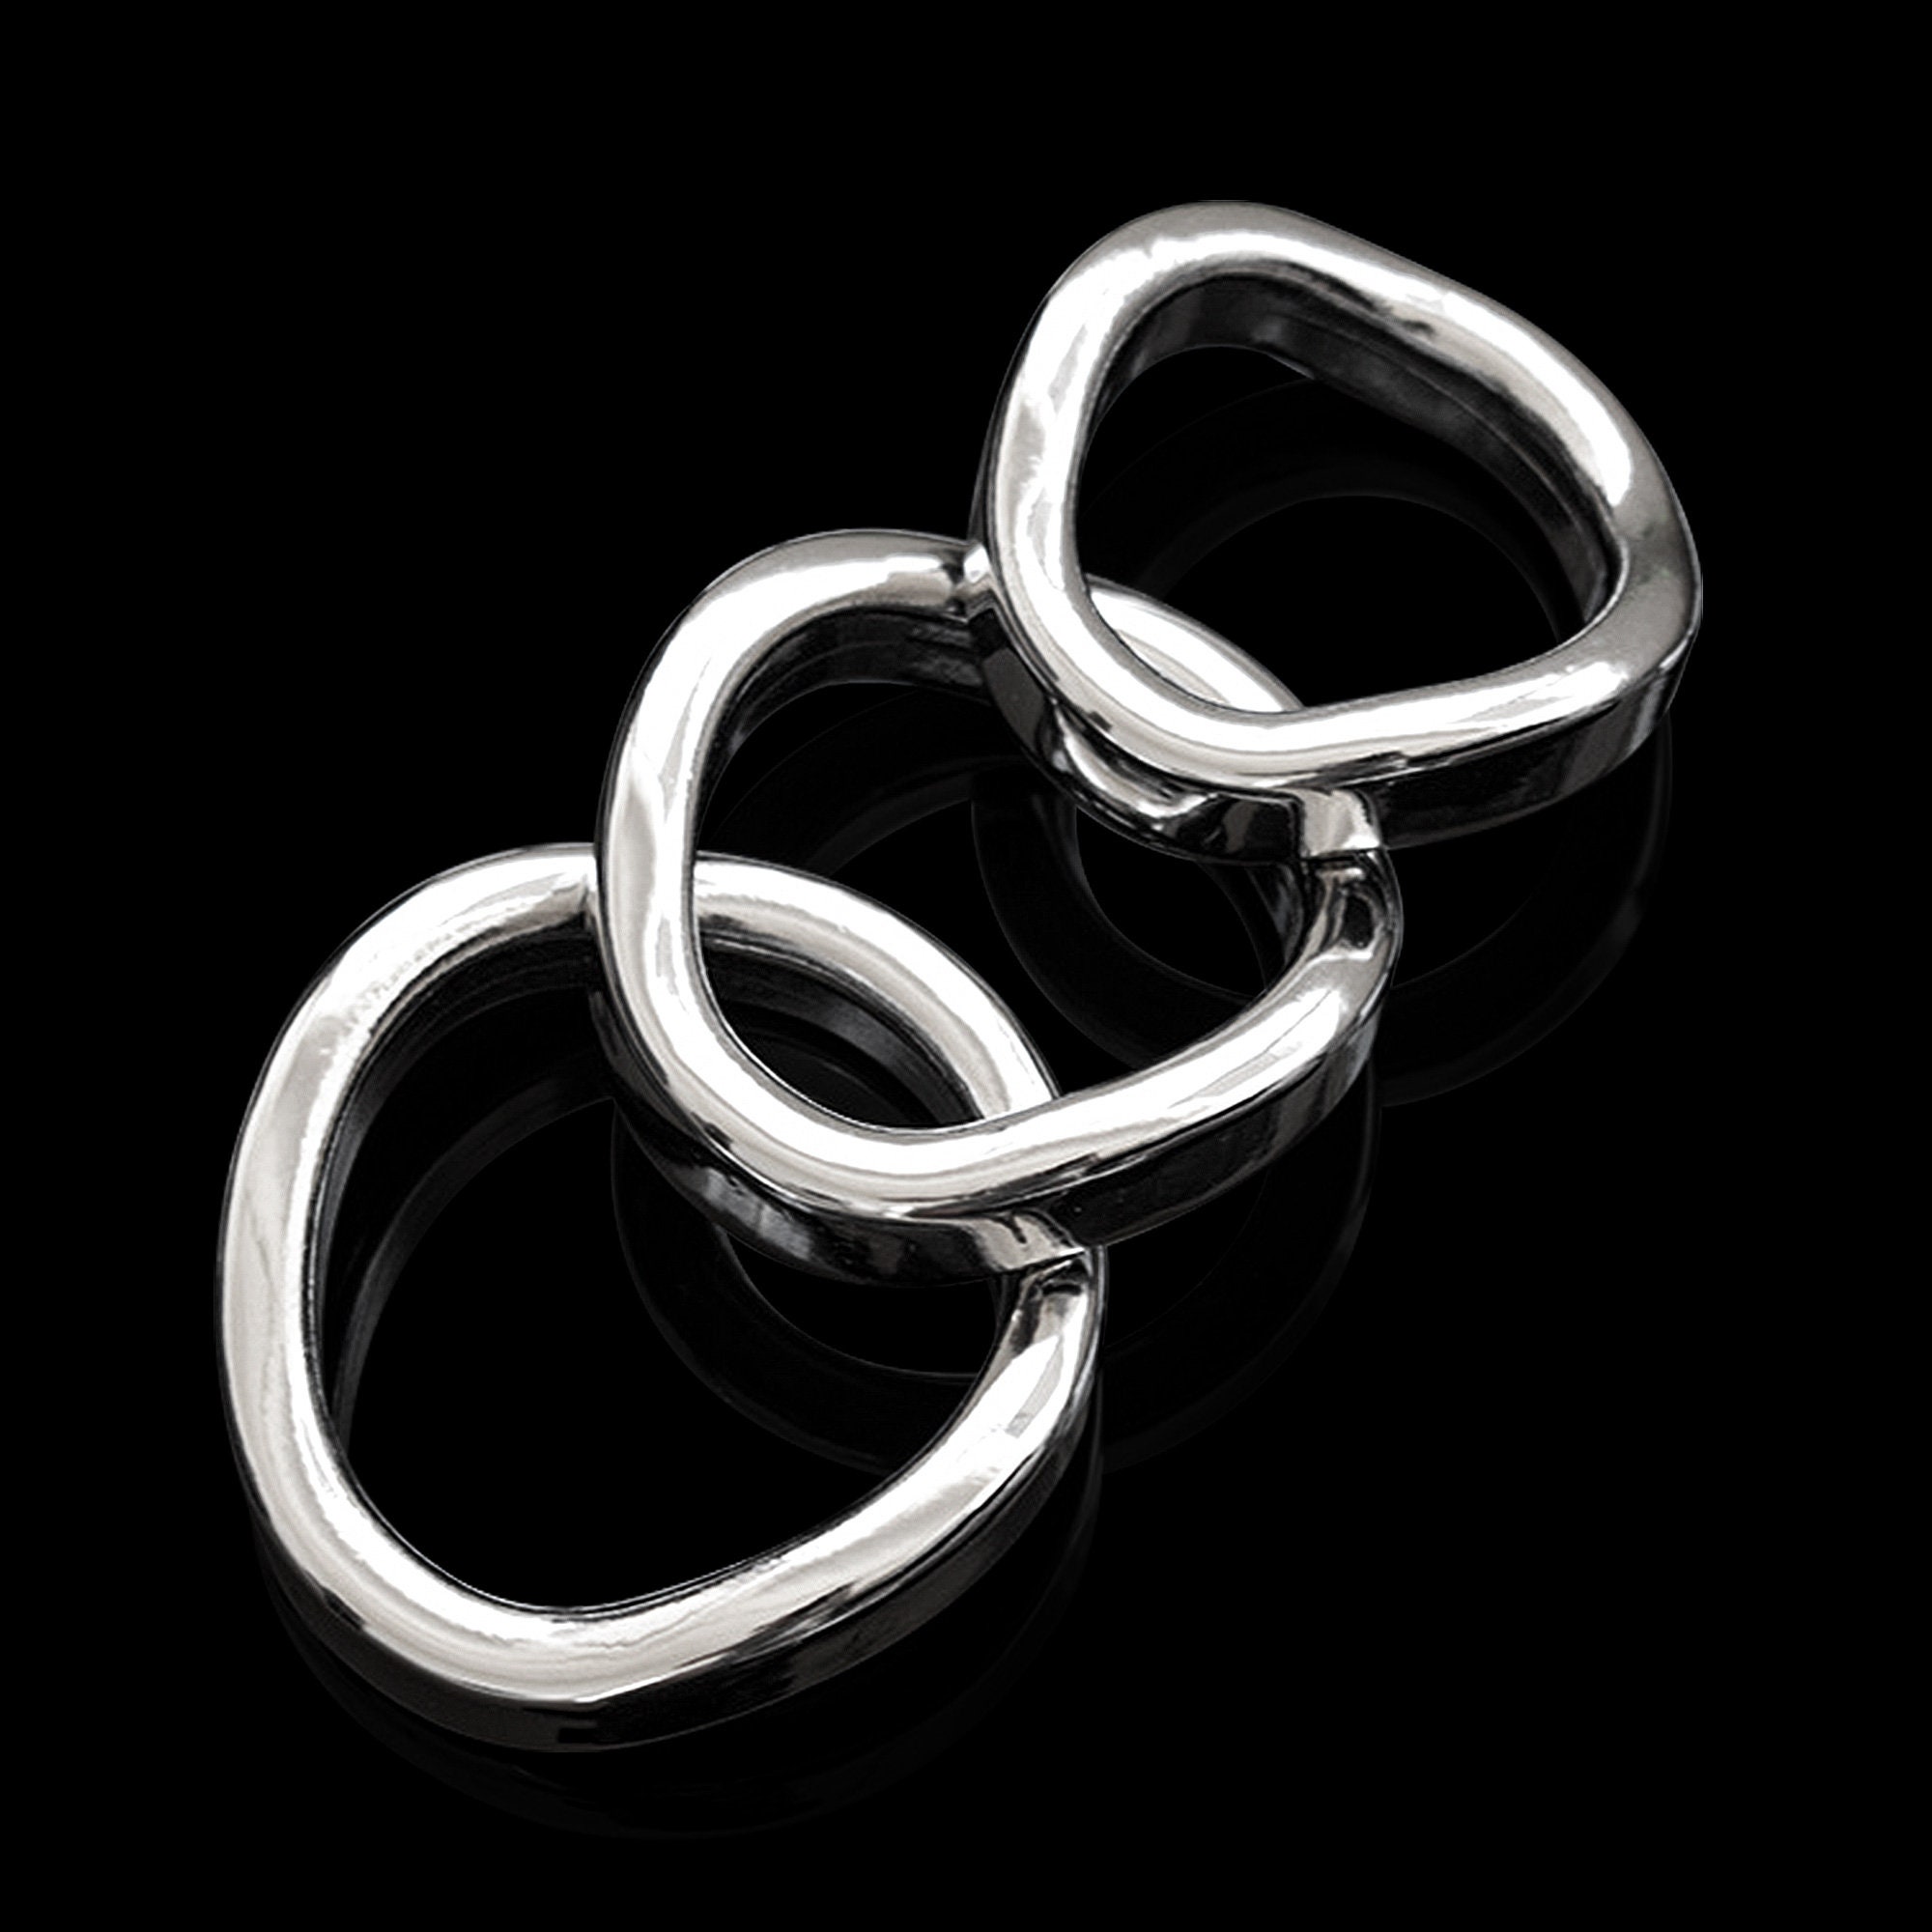 Male Cock Ring Smooth Curved Shape Fit Against Your Body pic